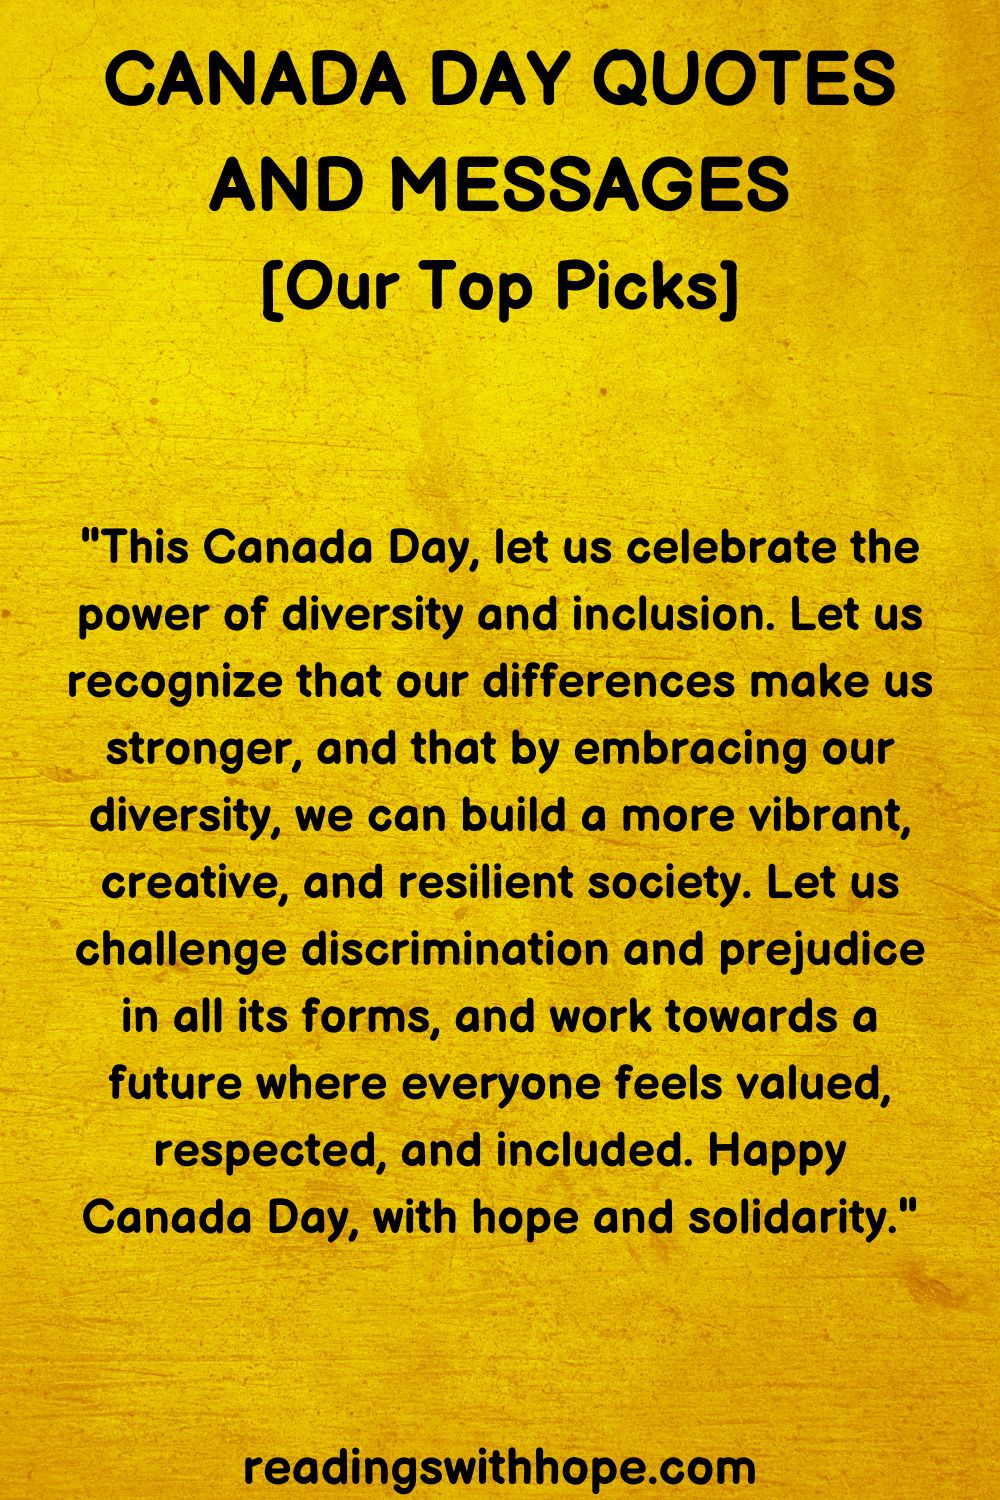 Canada Day Quotes and Messages